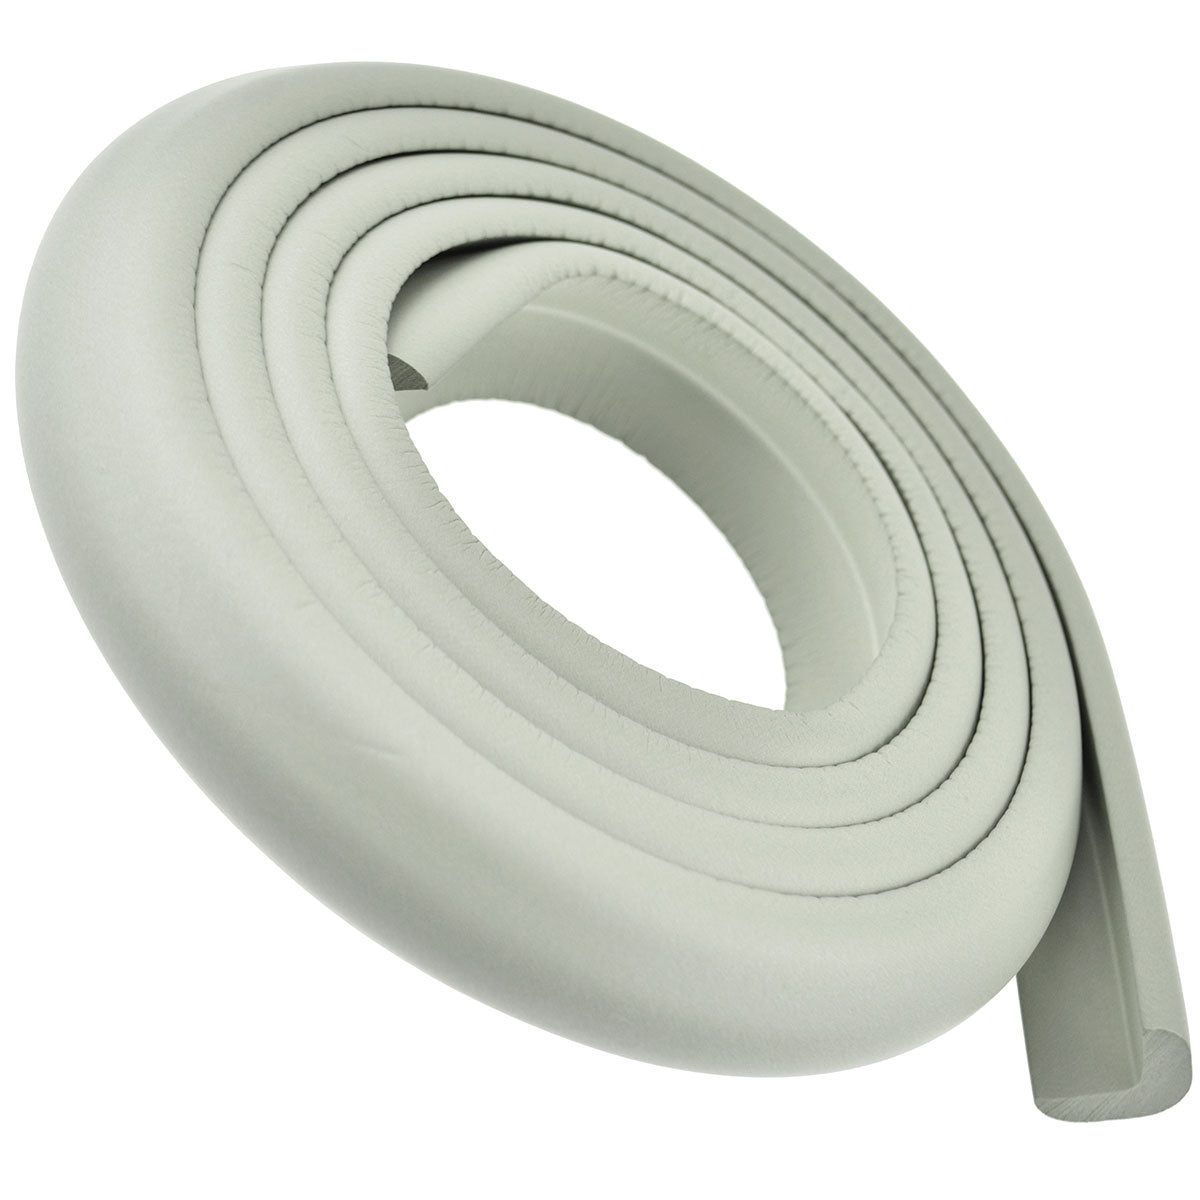 1 Roll Gray Standard L-Shaped Foam Edge Protector 78.7 inches (2 meters)